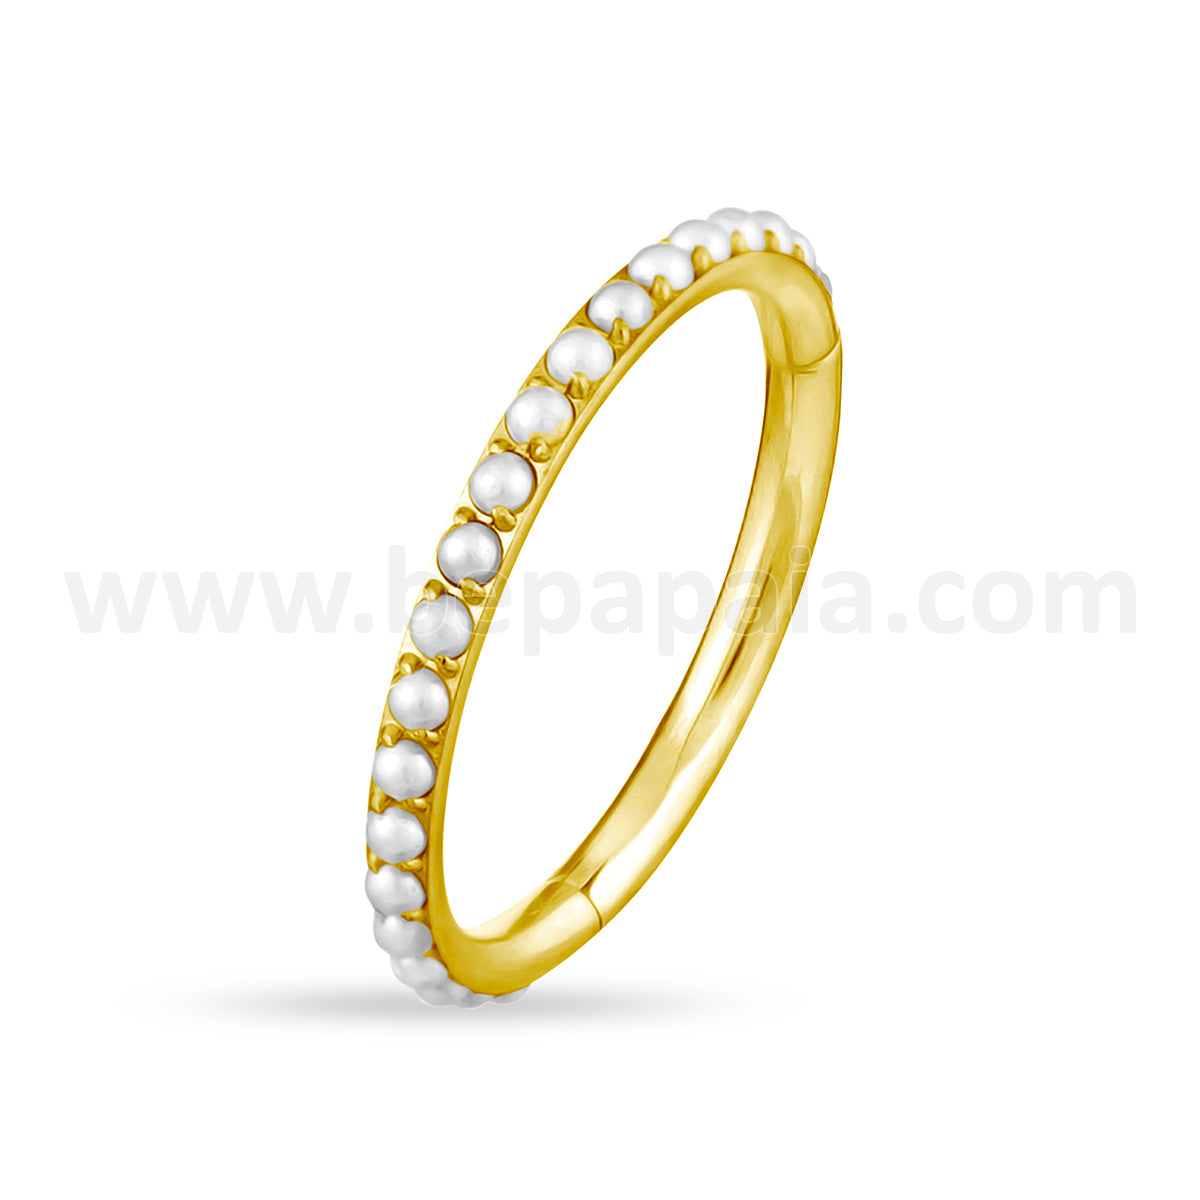 Segment ring with pearls 